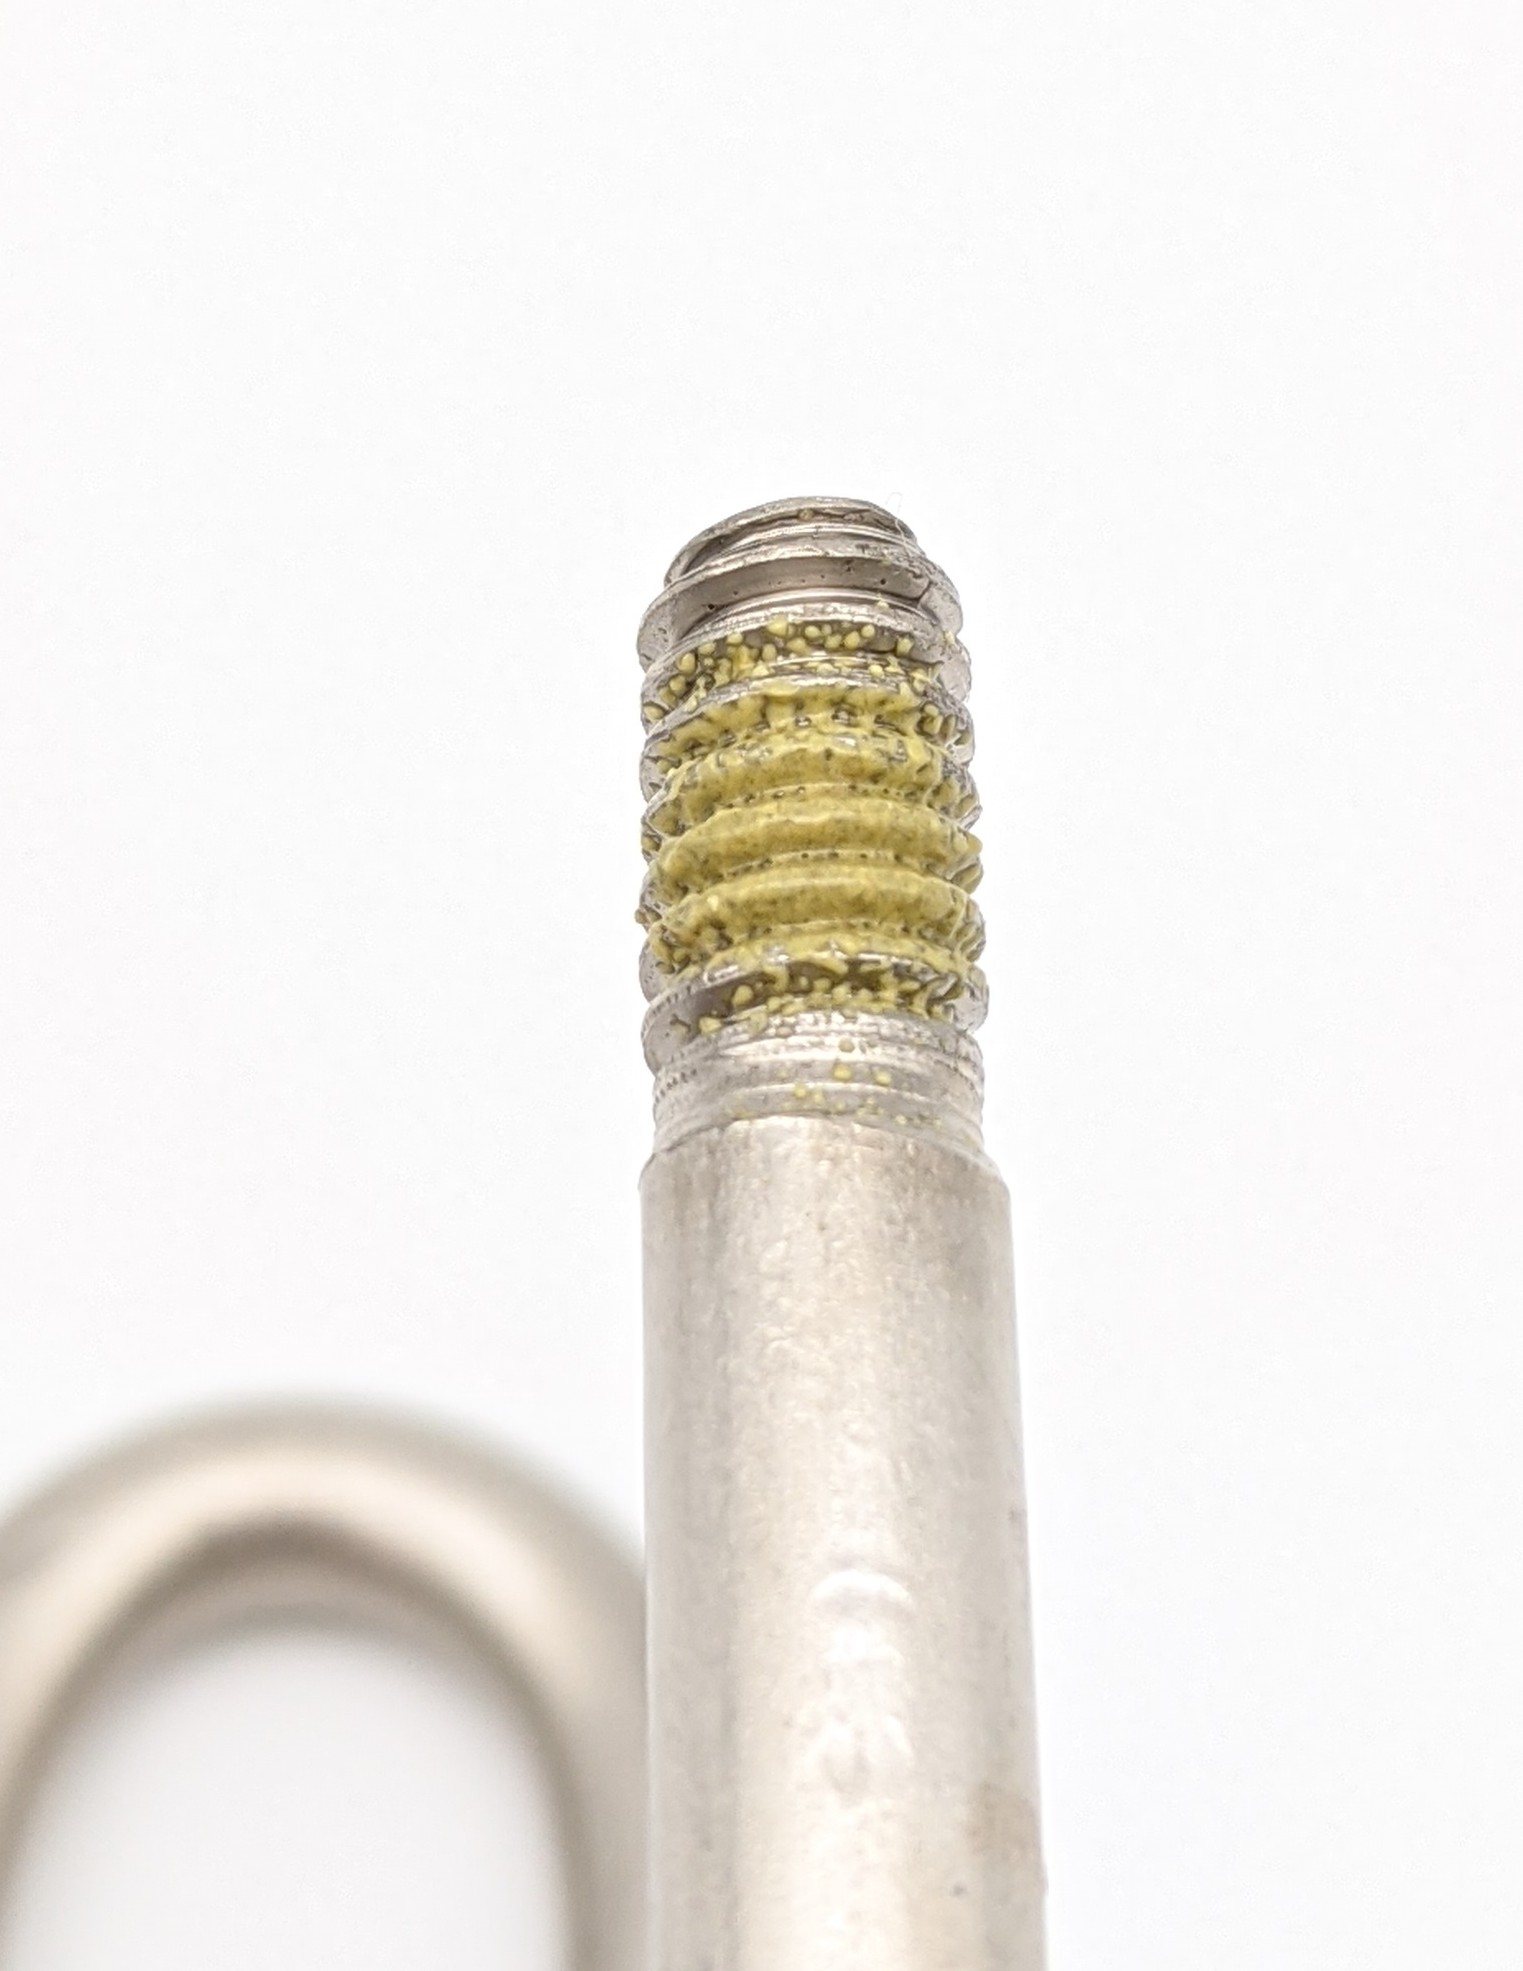 Wire form with pre-apply inert threadlocking patch